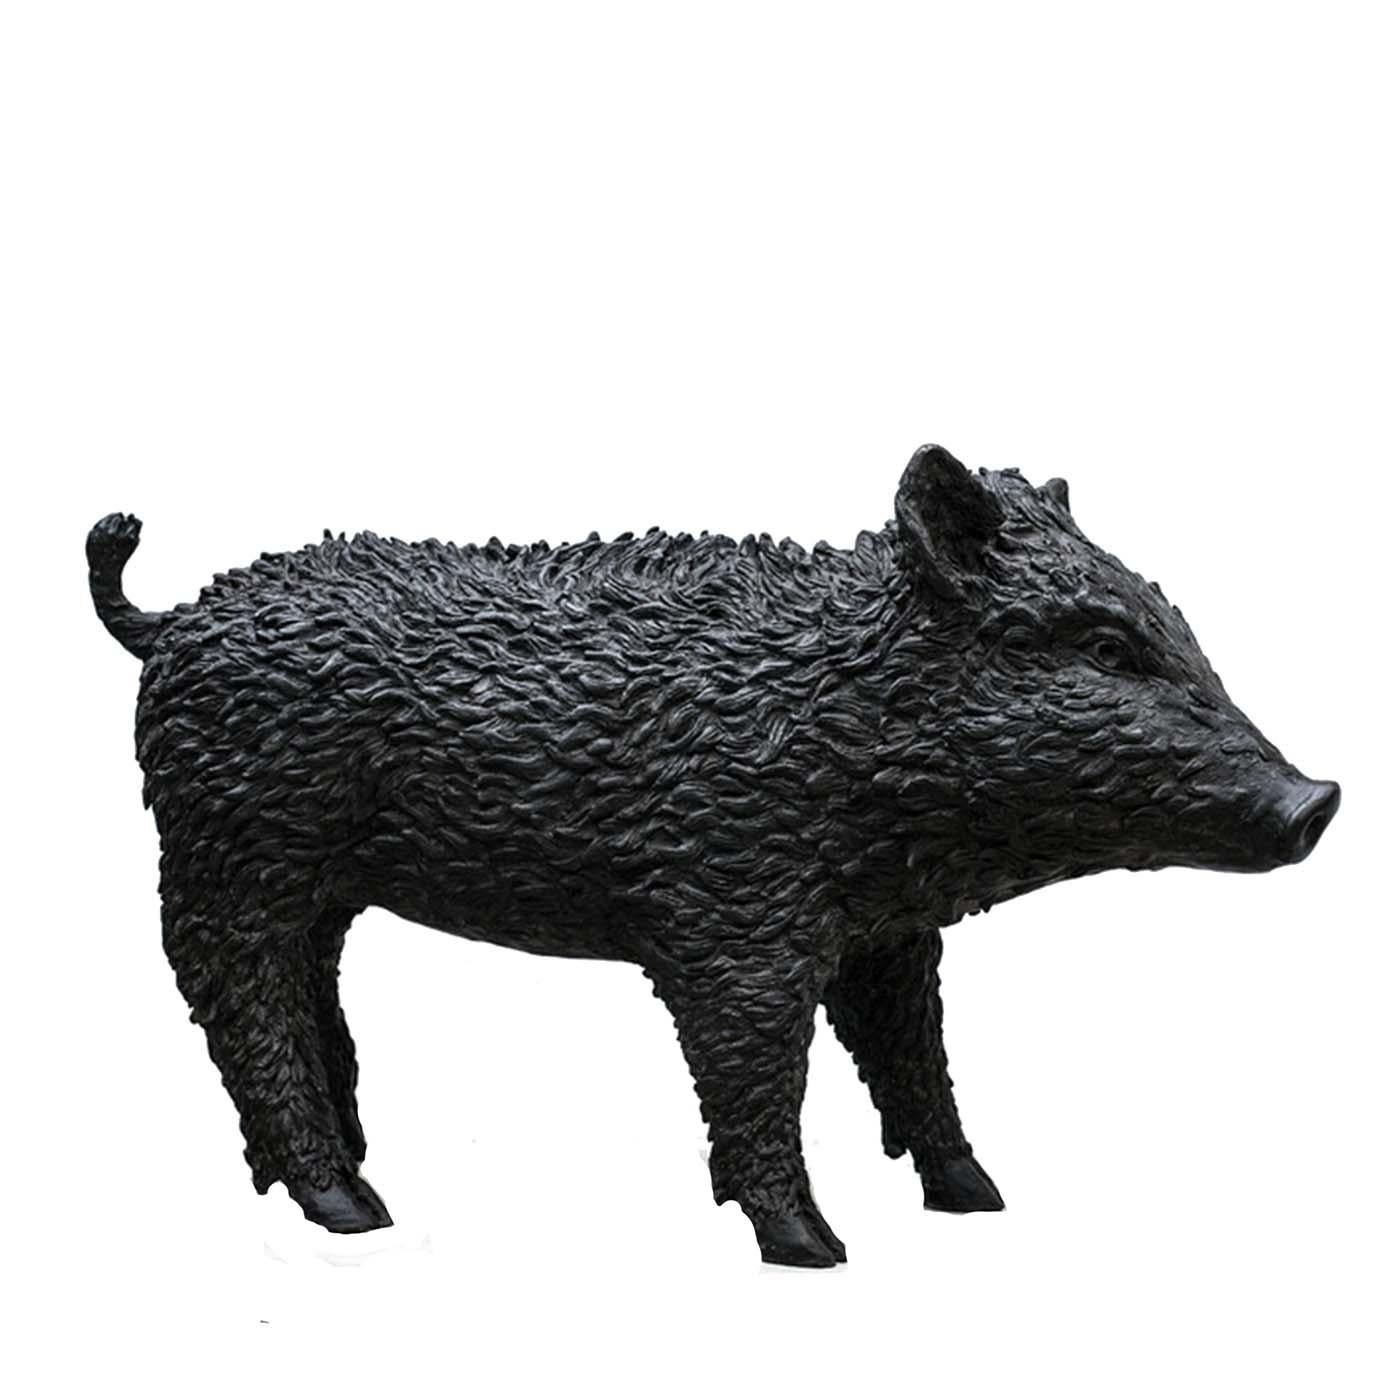 A symbol of Tuscan wildlife, the boar (